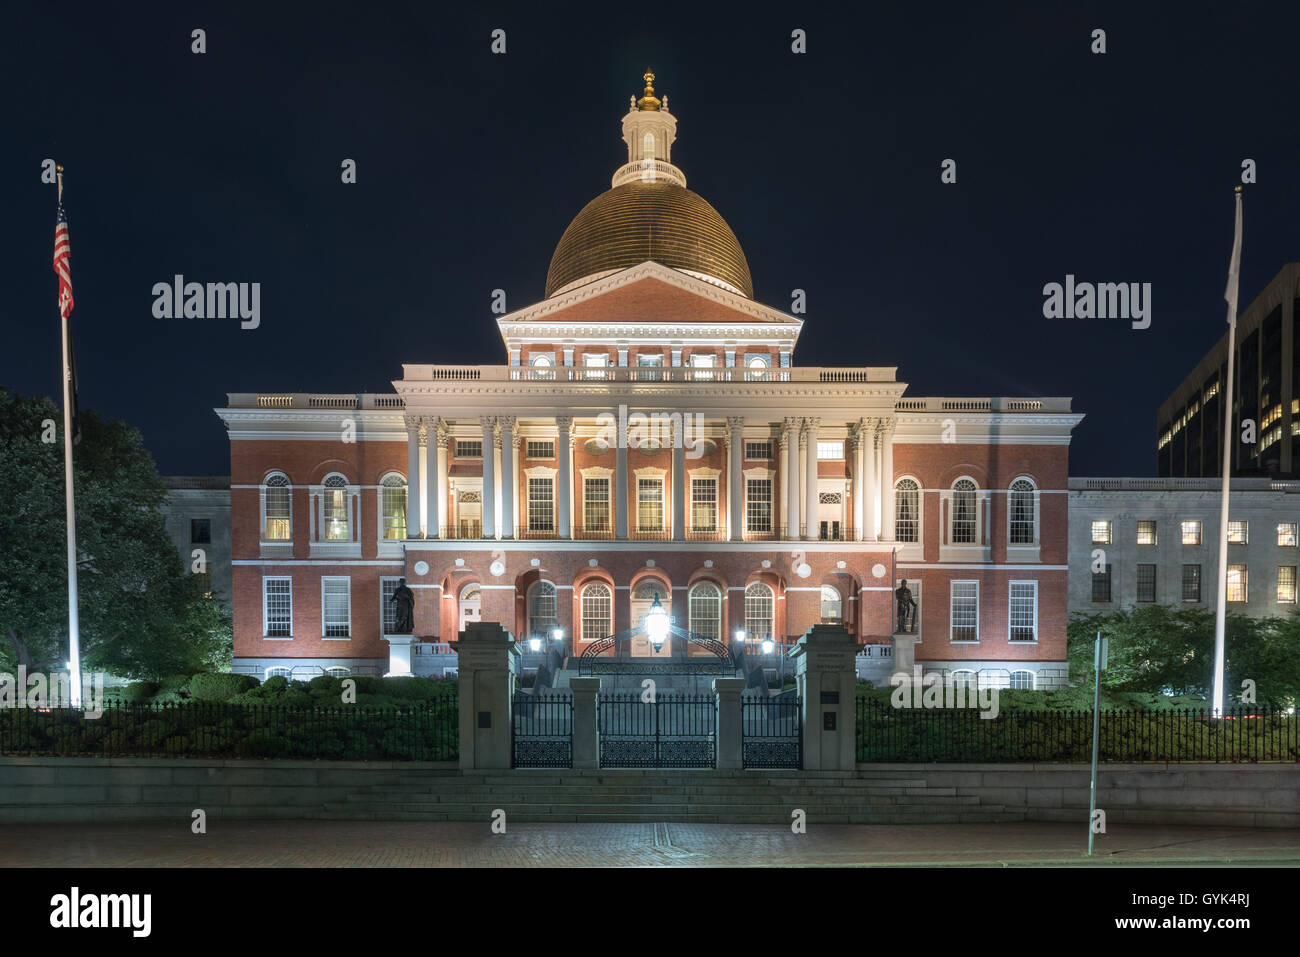 The Massachusetts State House, also called Massachusetts Statehouse or the 'New' State House at night. Stock Photo